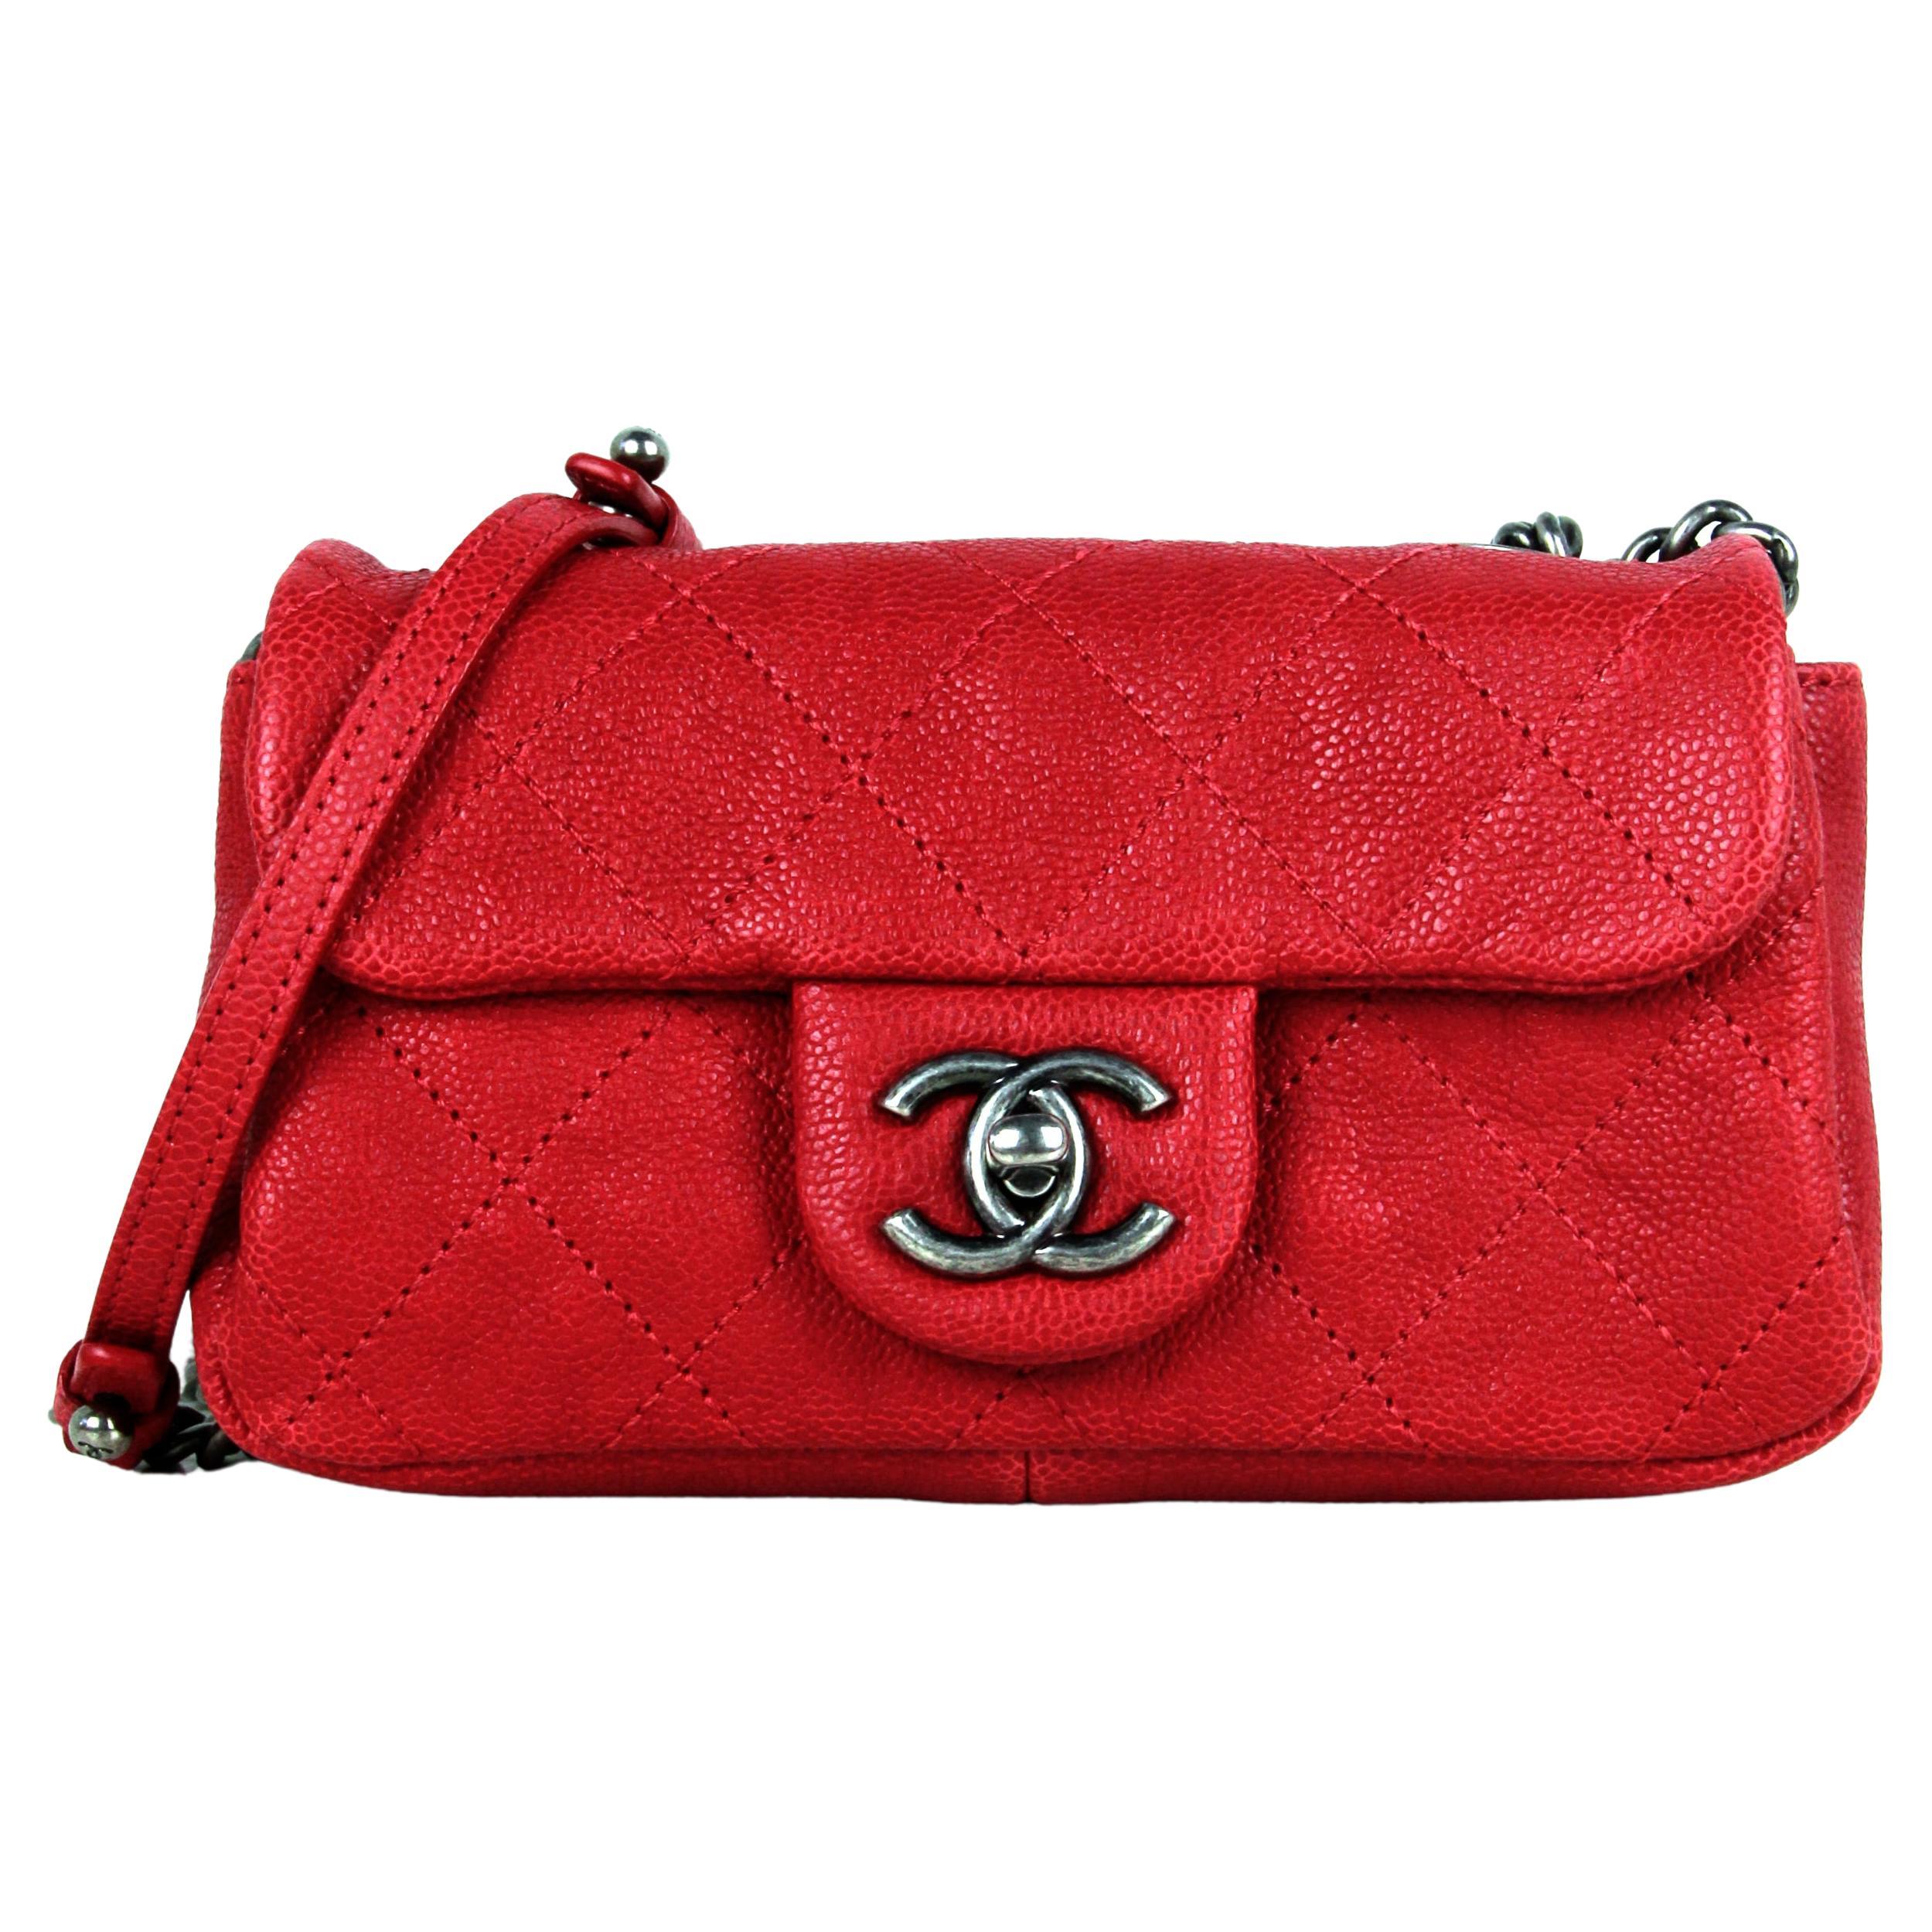 Chanel Red Caviar Leather Quilted Mini Simply CC Flap Bag